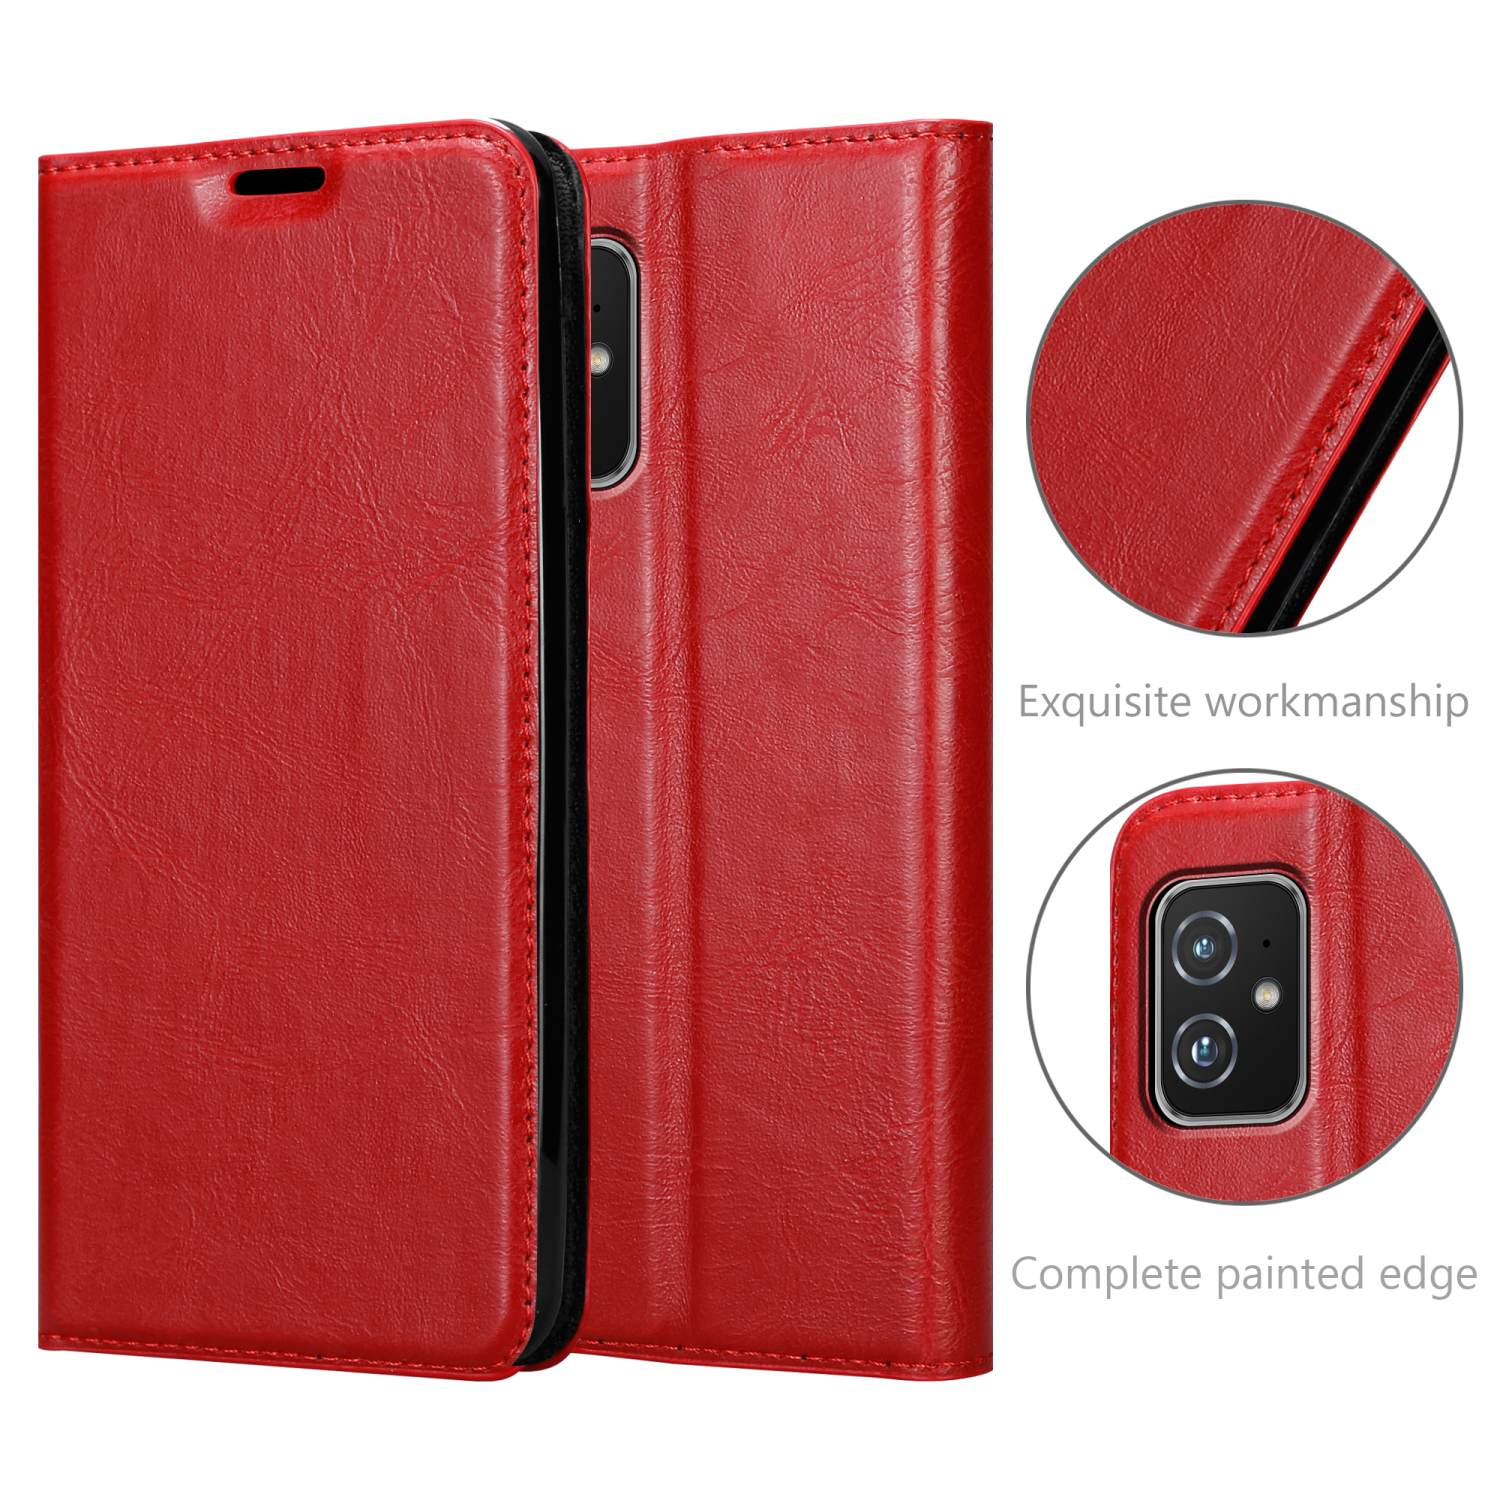 APFEL Hülle Invisible Book Magnet, Asus, ZenFone Bookcover, CADORABO 8, ROT